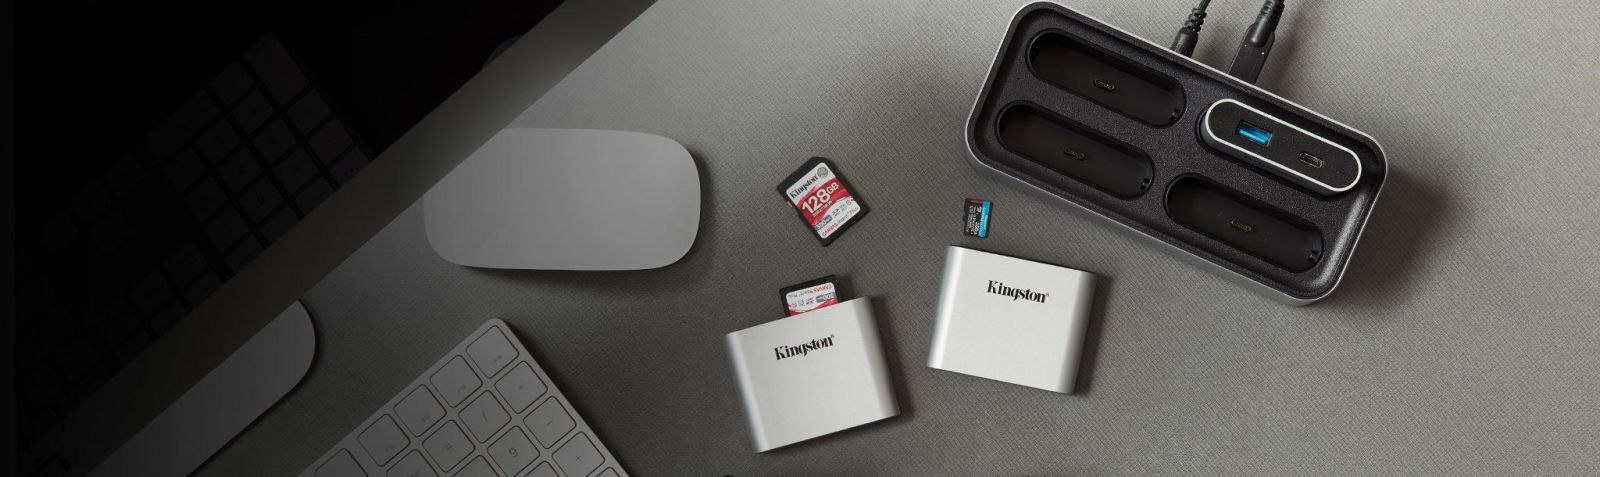 Кард-ридер Kingston workflow WFS-SD. Kingston workflow Station Dock. Кард-ридер Kingston workflow WF SD USB 3.2. Kingston workflow WFS-SDC.